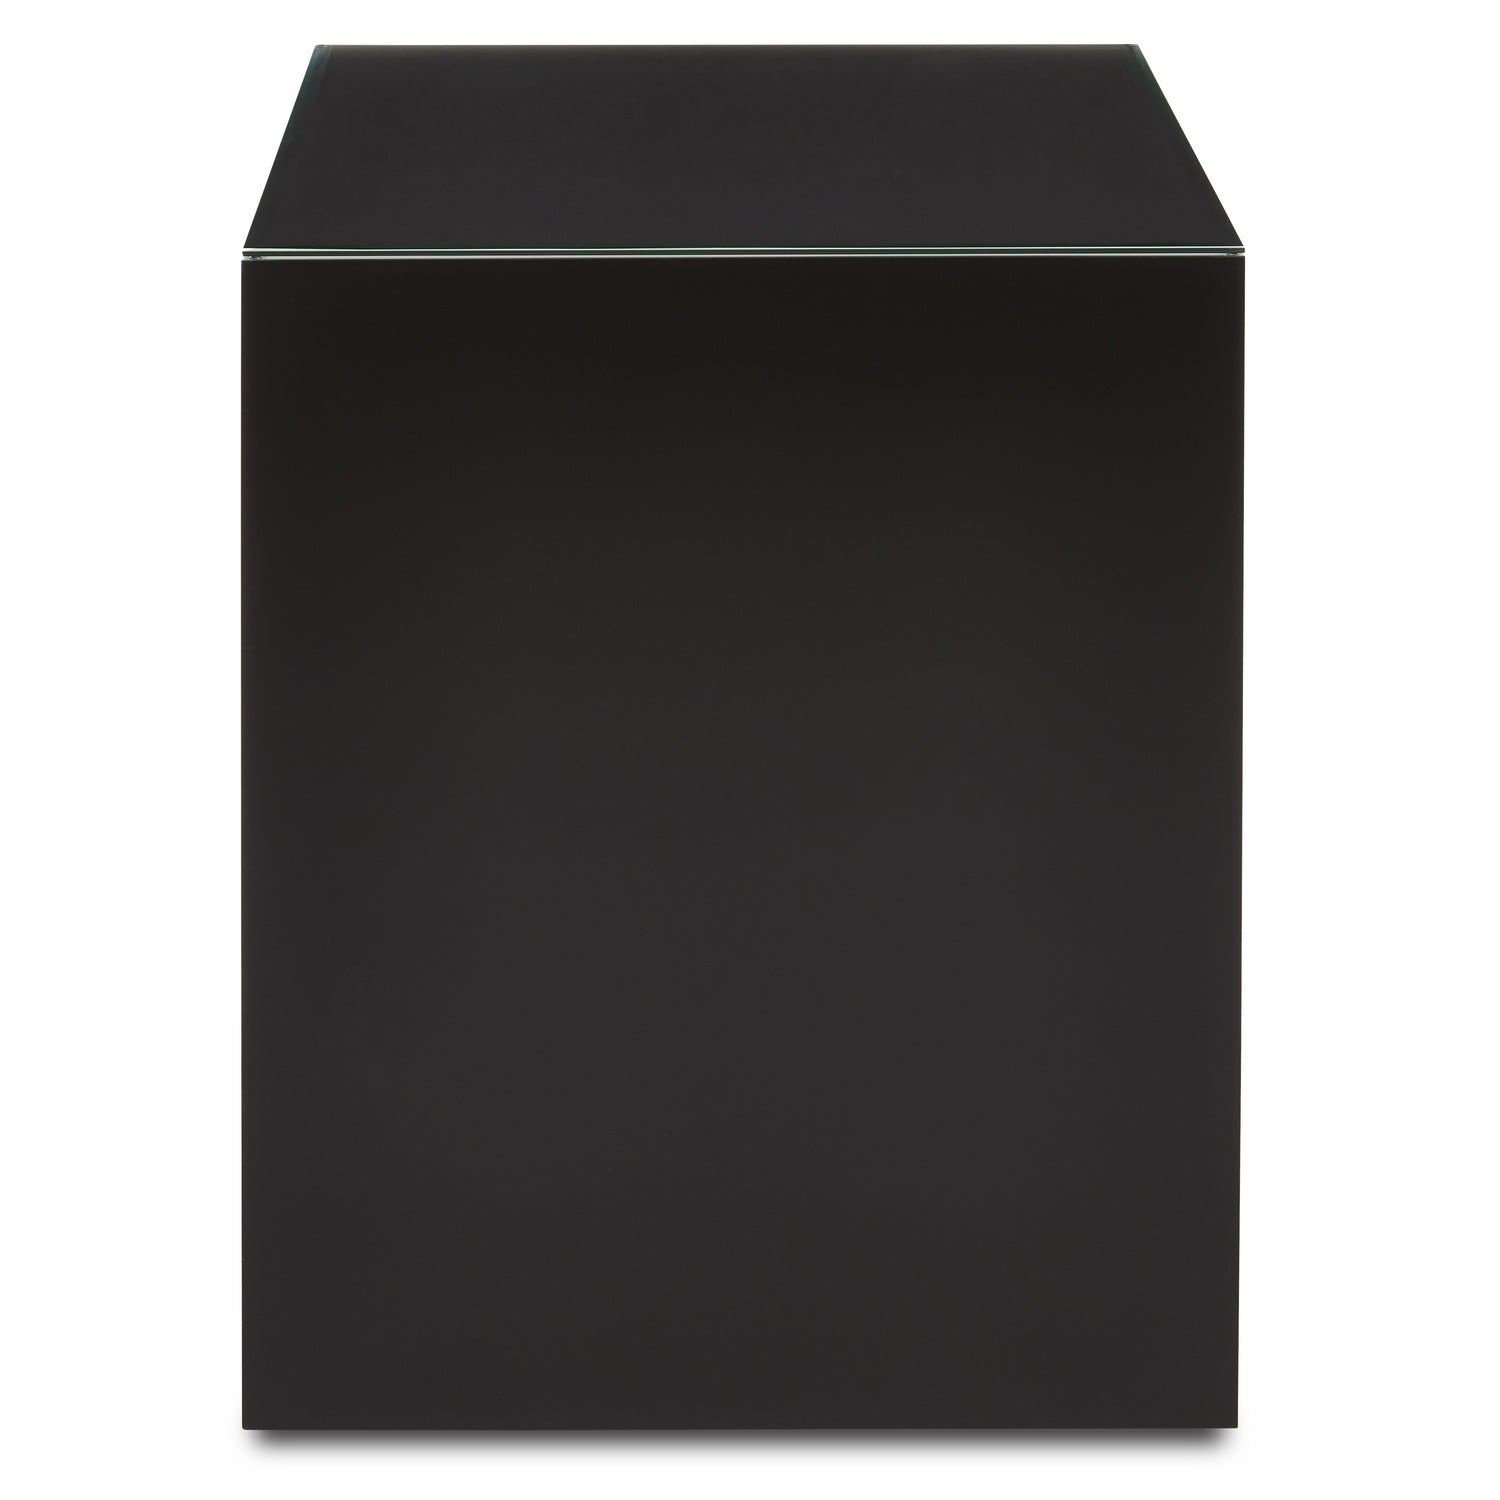 Writing Desk from the Barry Goralnick collection in Caviar Black/Gold finish